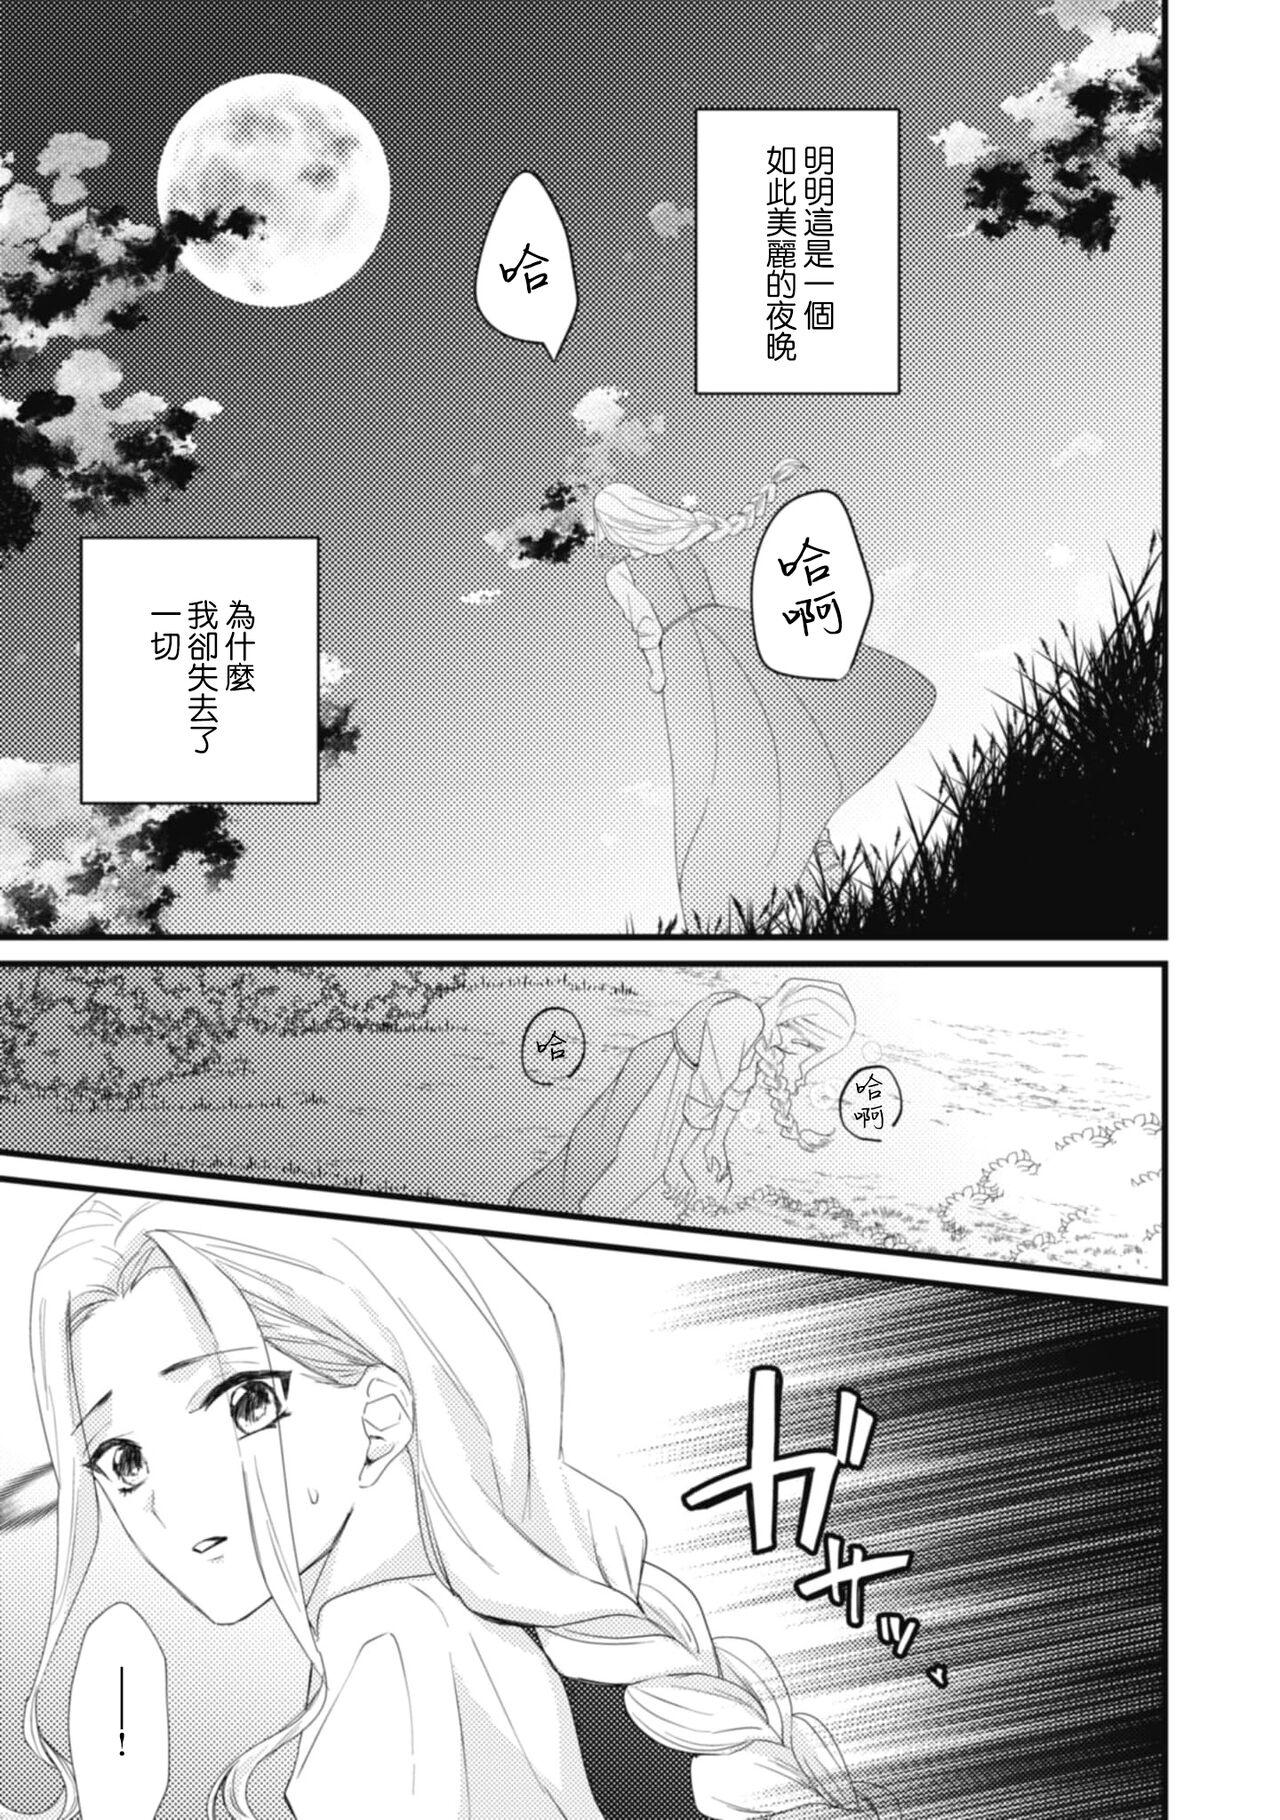 A shepherd in love with a demoted knight | 与被贬骑士相爱的牧羊女1 3